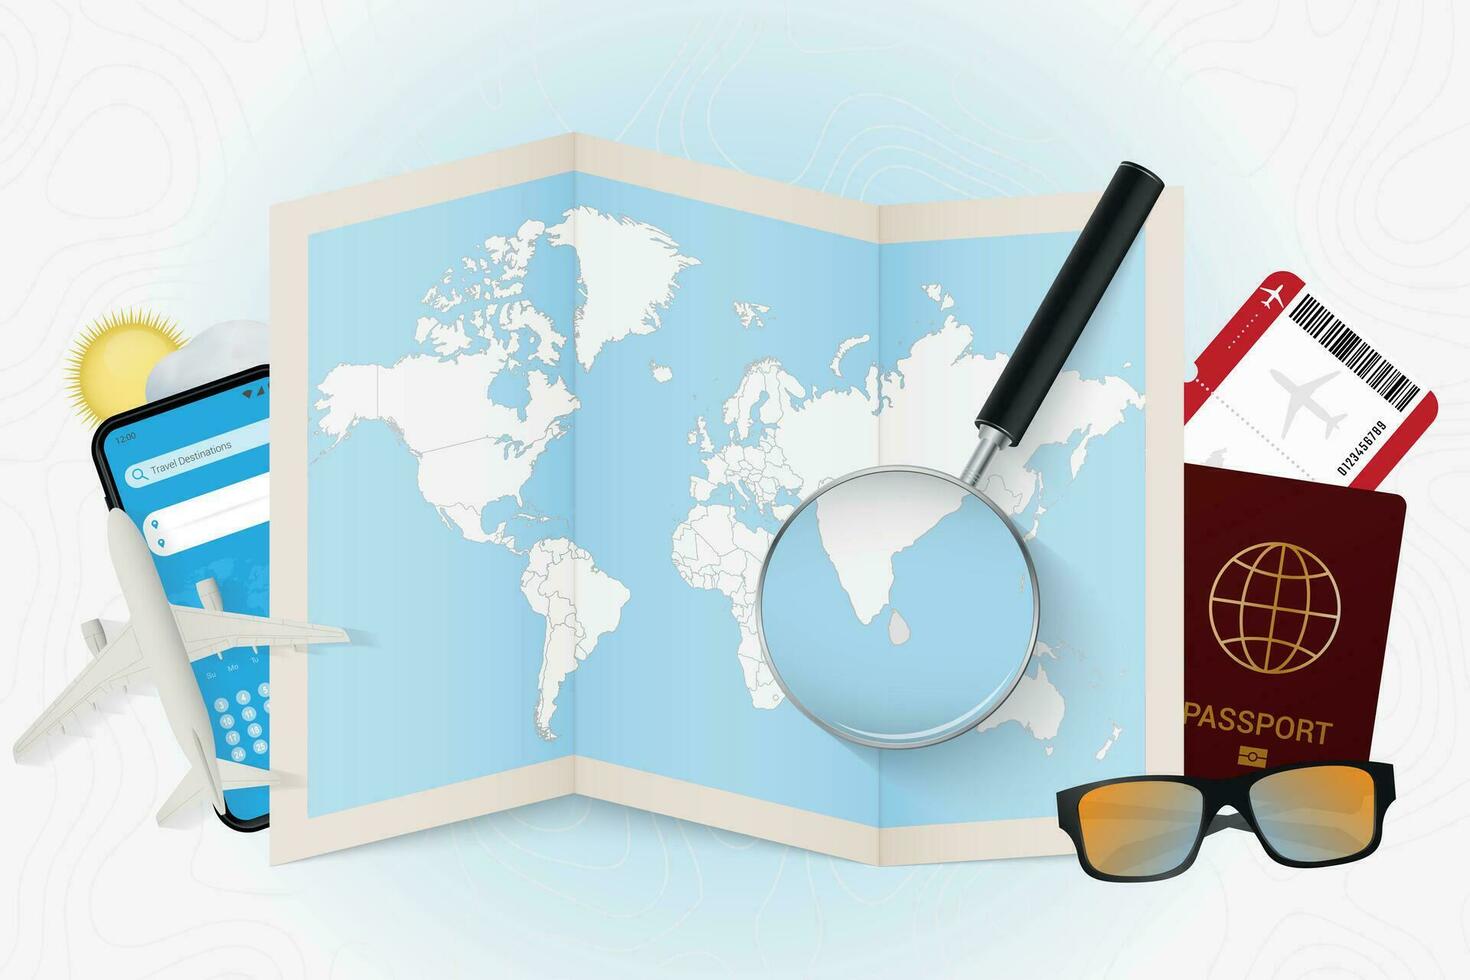 Travel destination Sri Lanka, tourism mockup with travel equipment and world map with magnifying glass on a Sri Lanka. vector